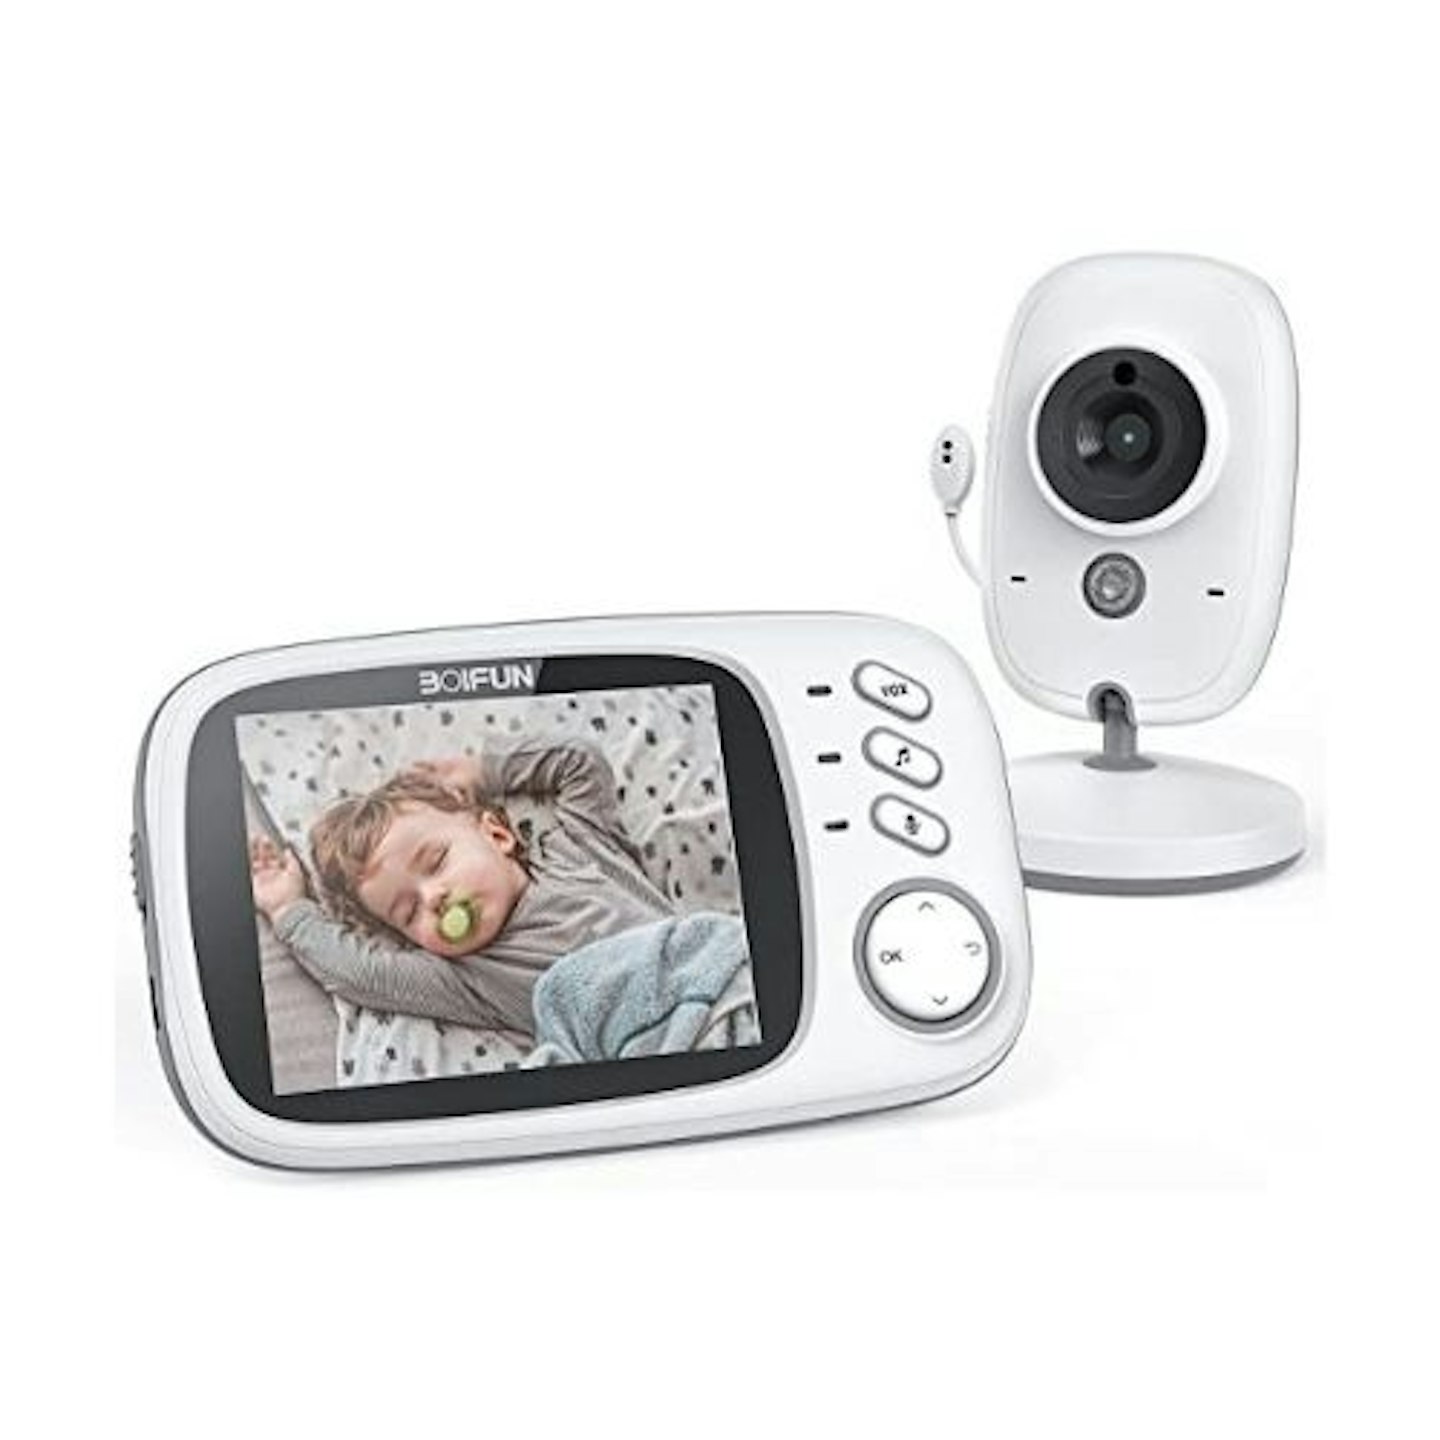 HelloBaby monitor : This is the Baby Monitor a New Mom need!